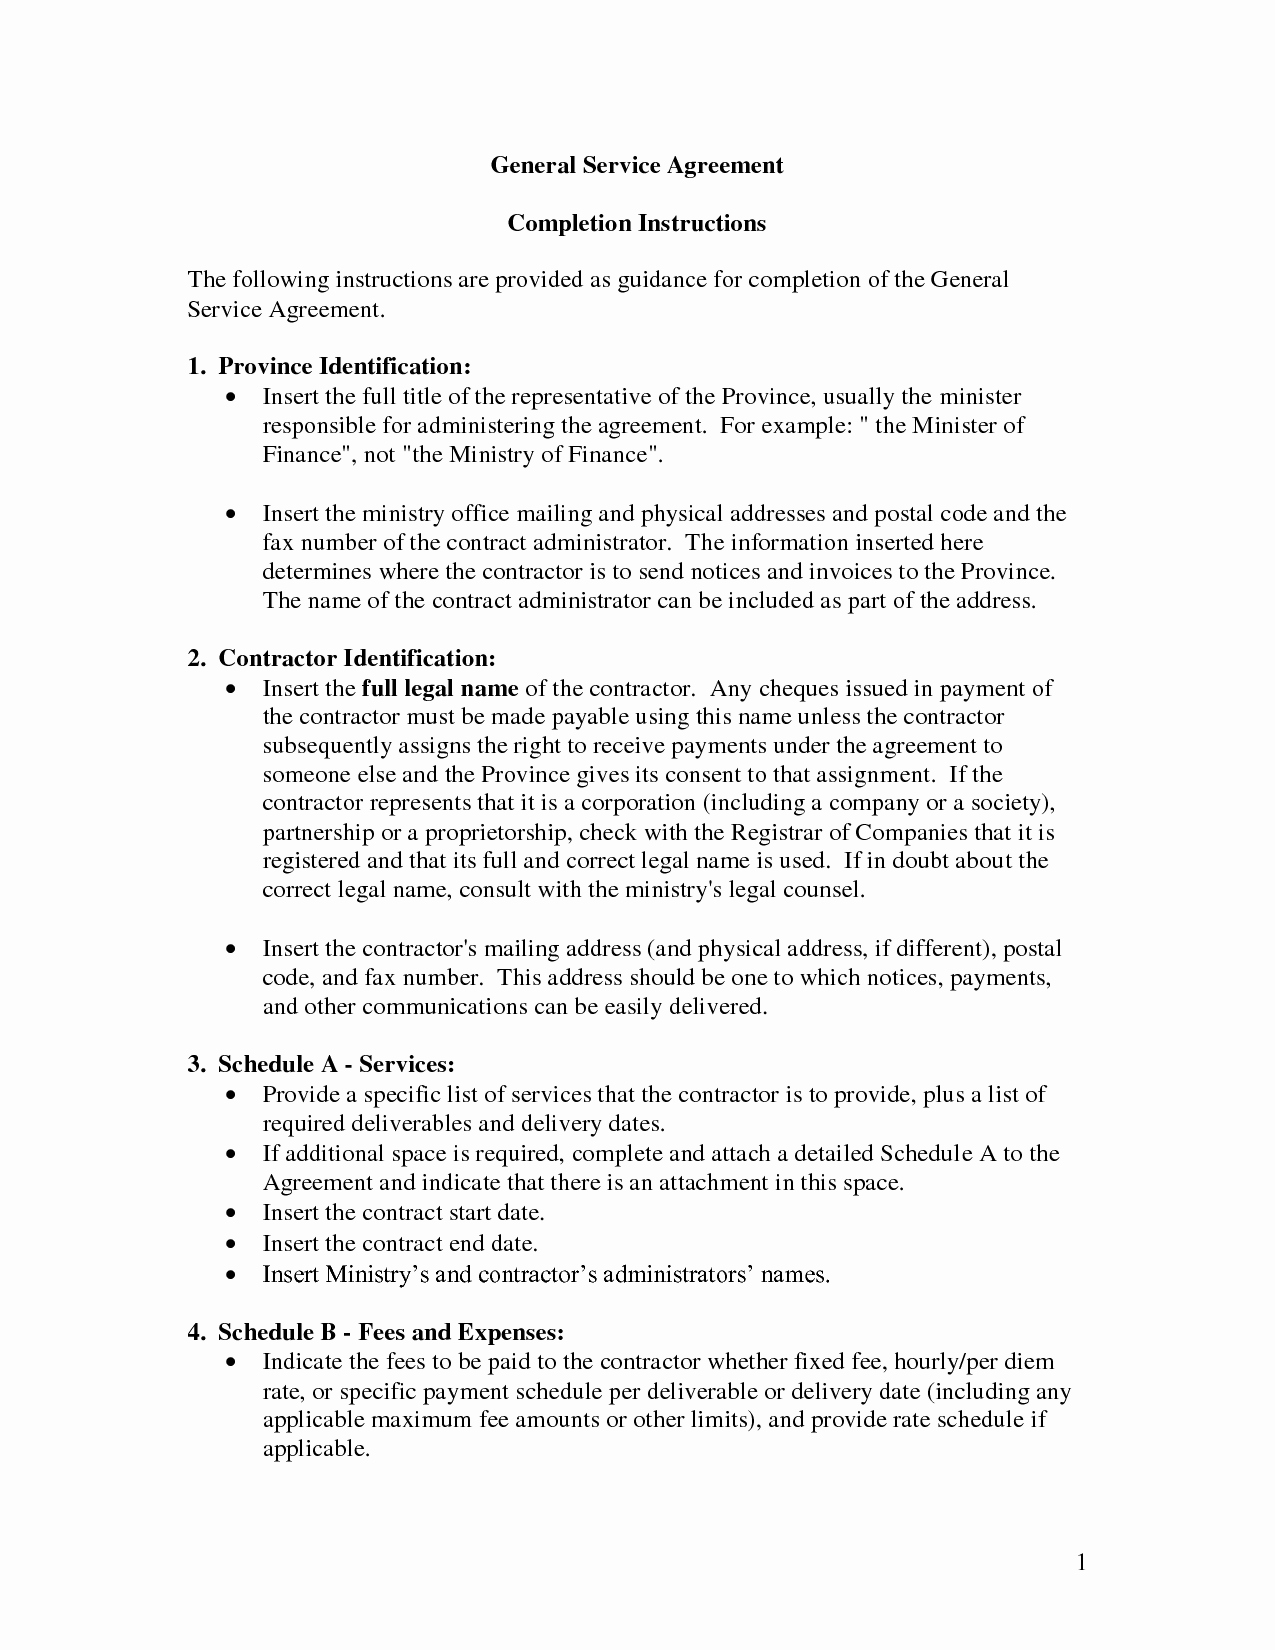 Contract for Services Template Elegant General Service Agreement Template by Banter General